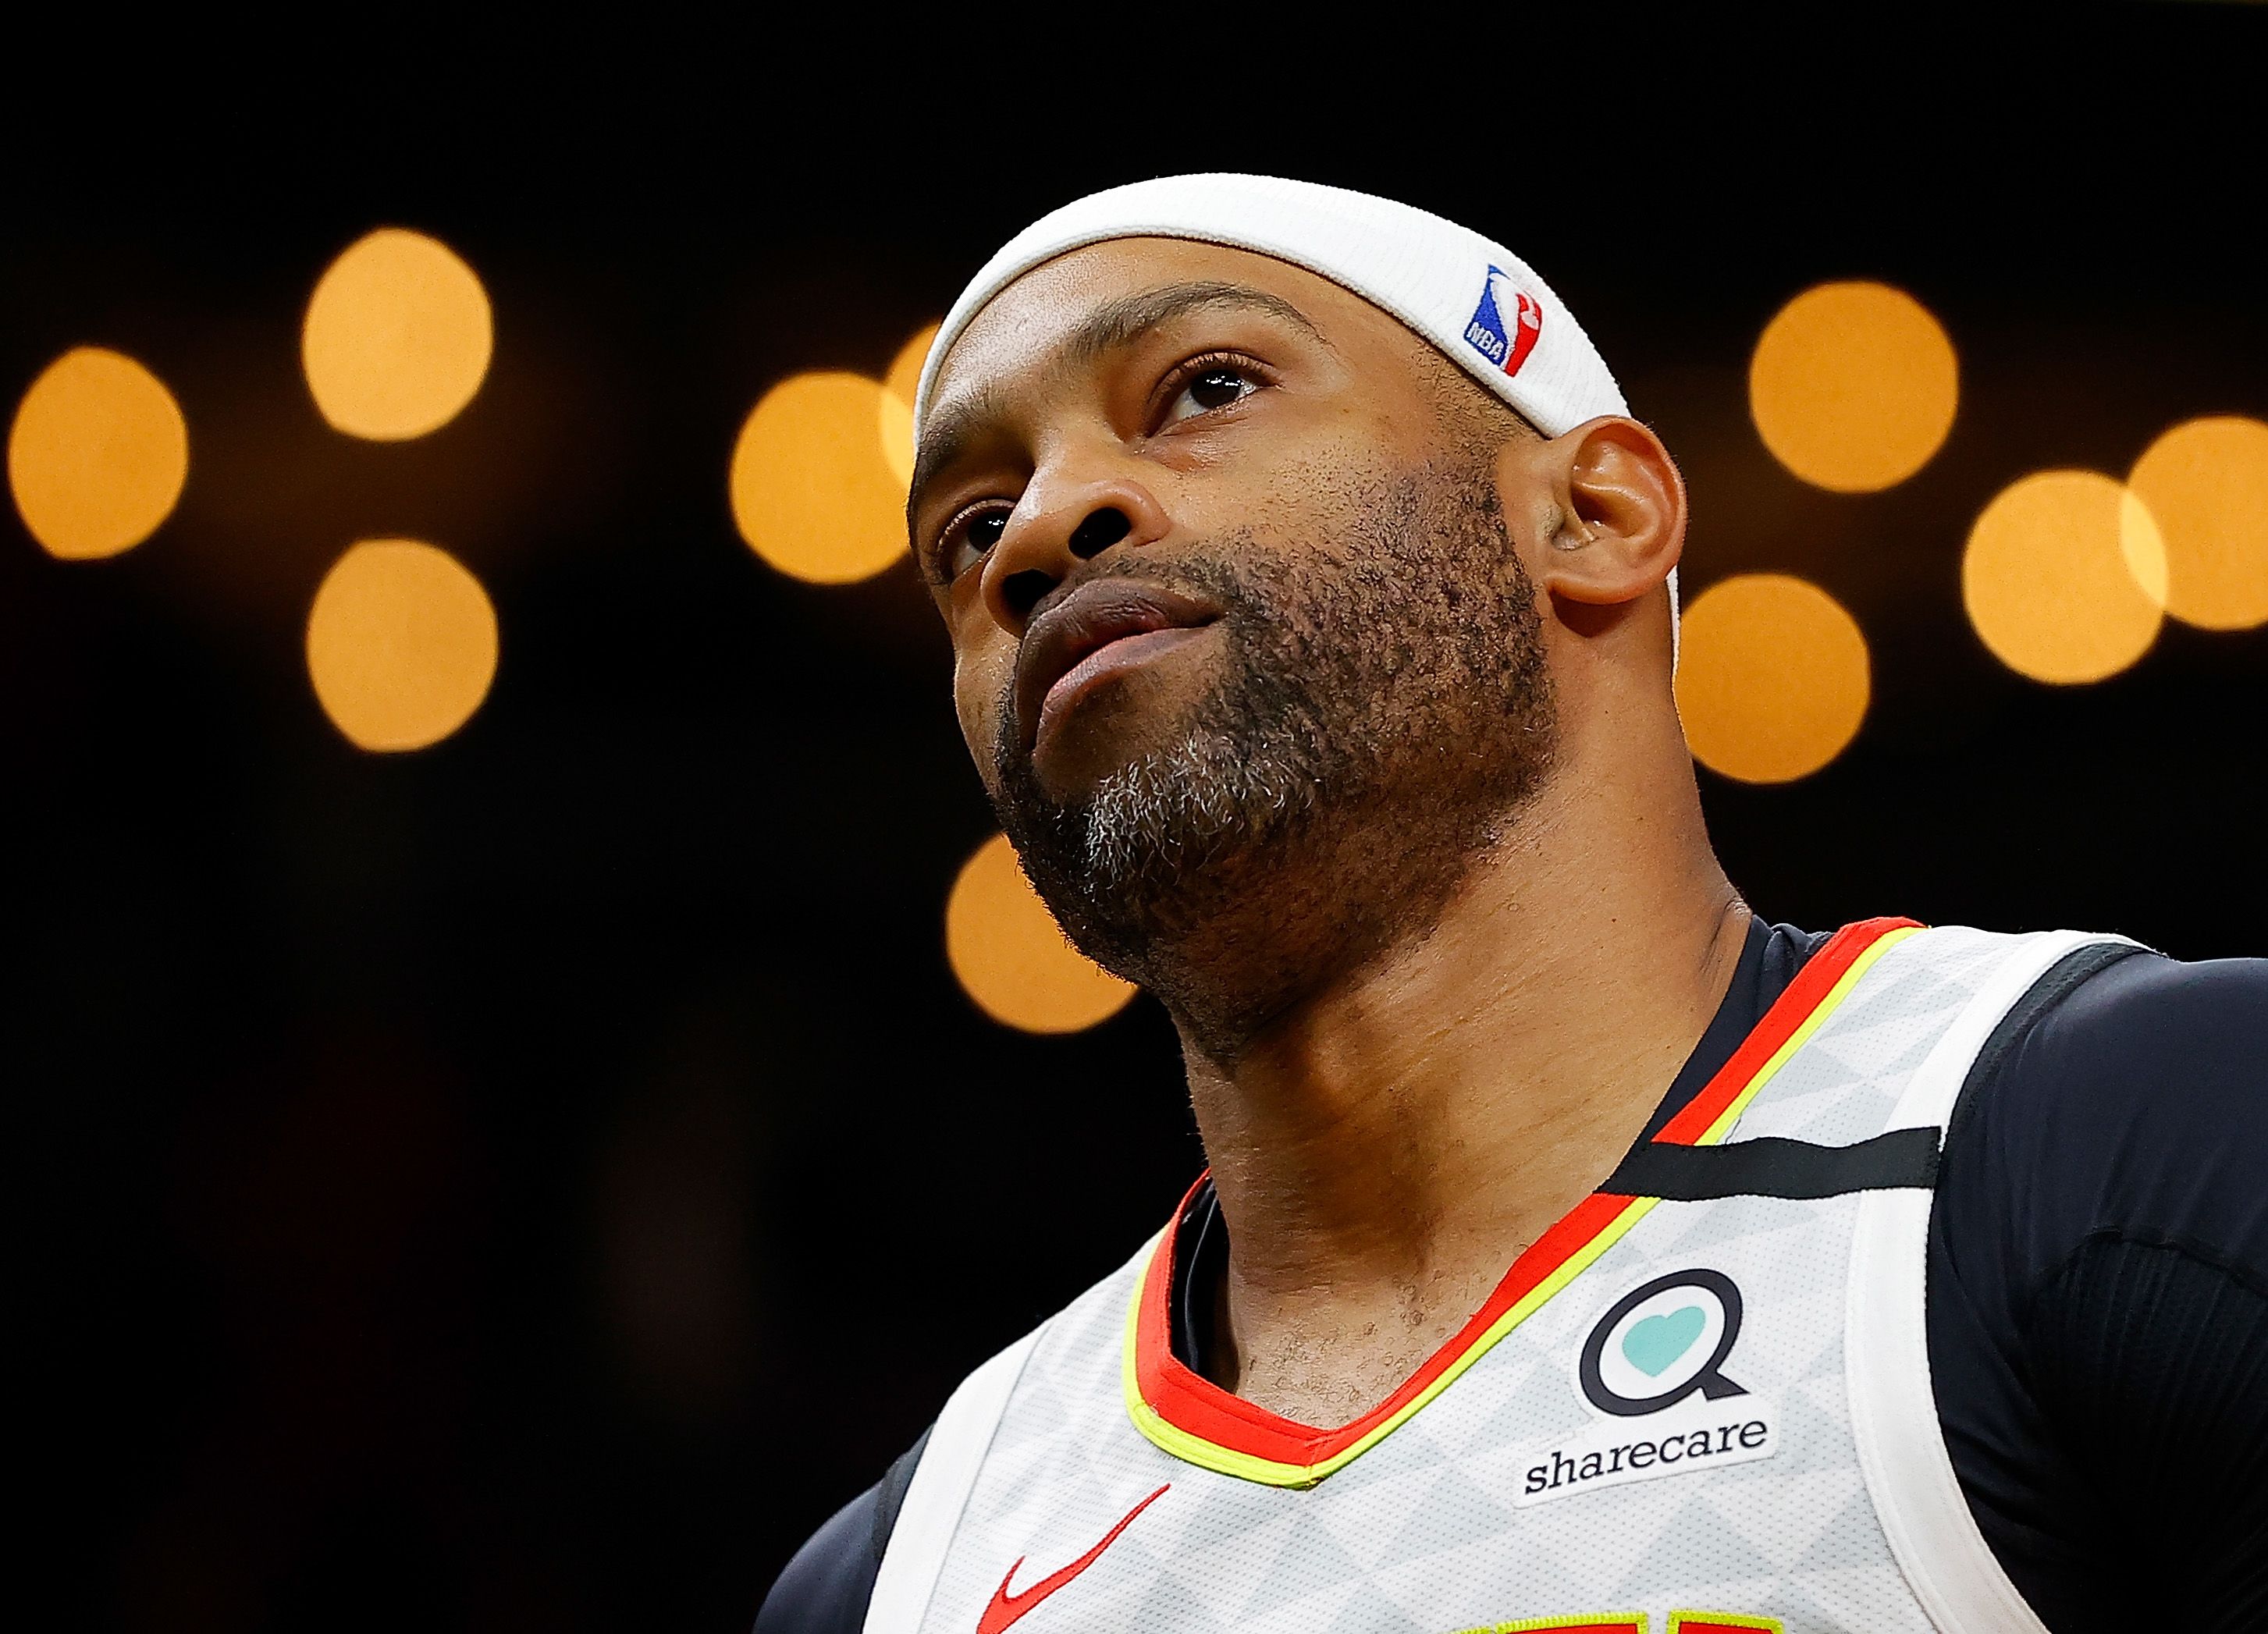 Vince Carter: Getting his number retired would be “dream come true